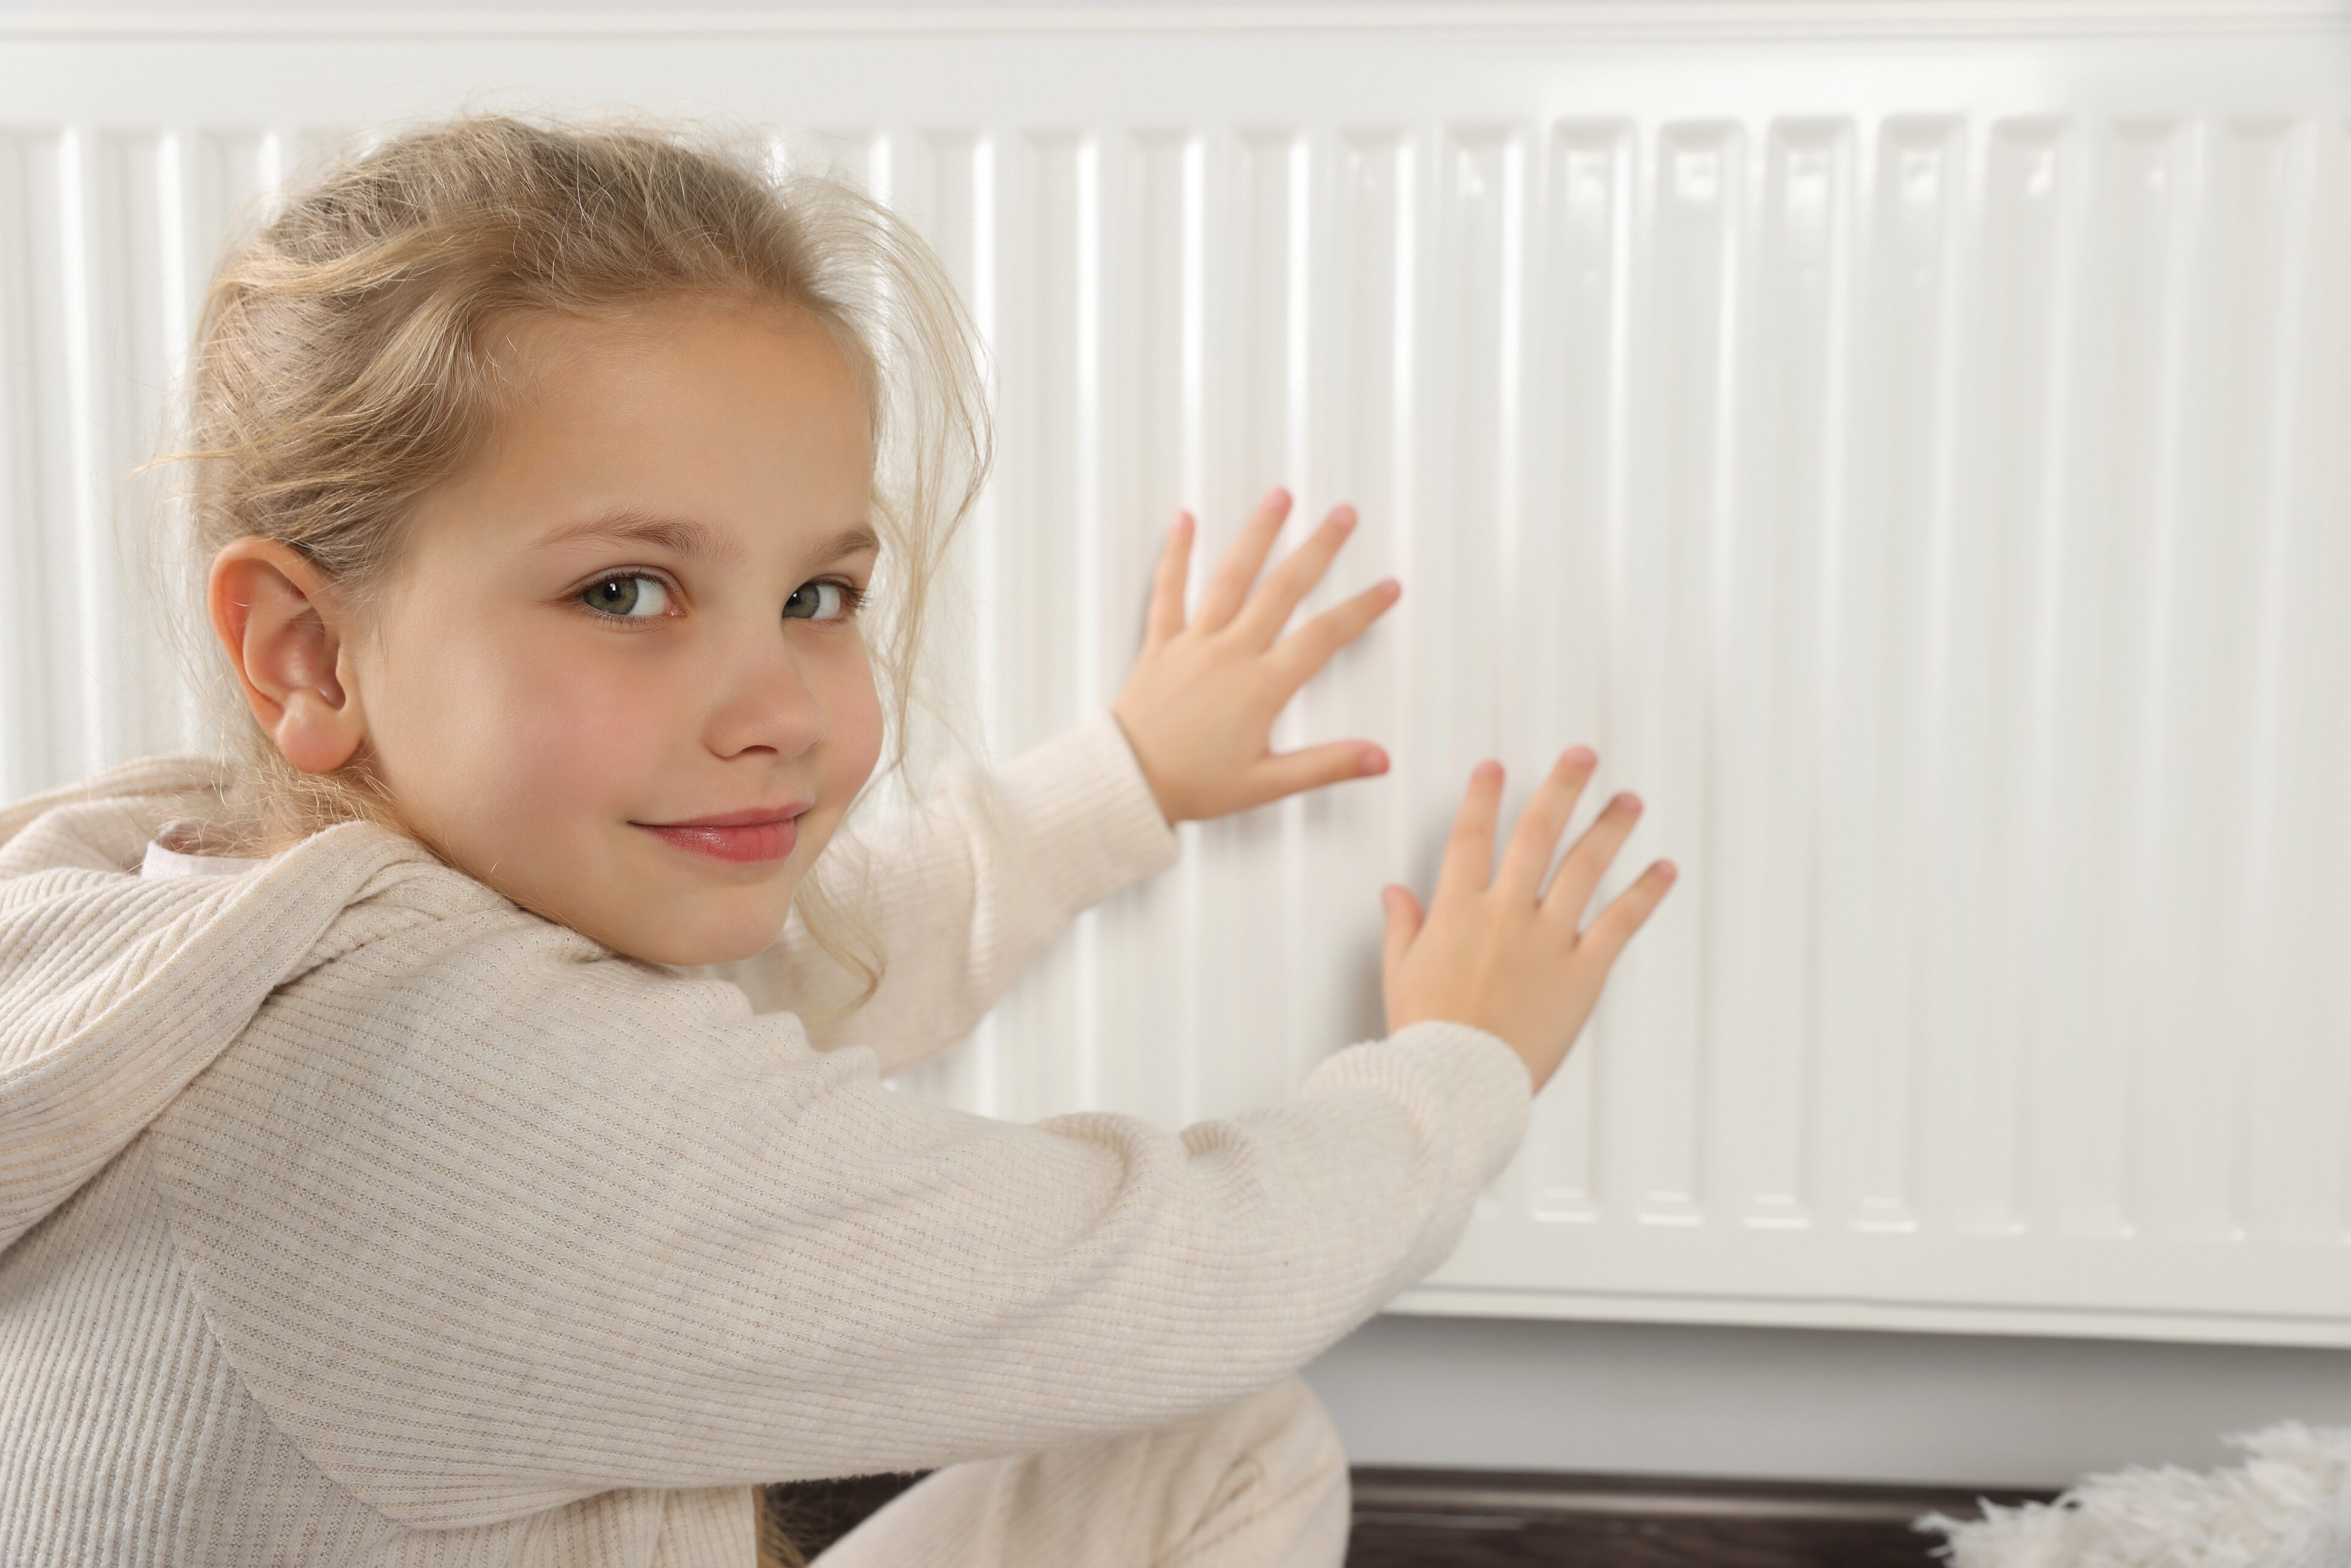 £30 could help keep the heating on for families who are struggling, keeping their children warm.